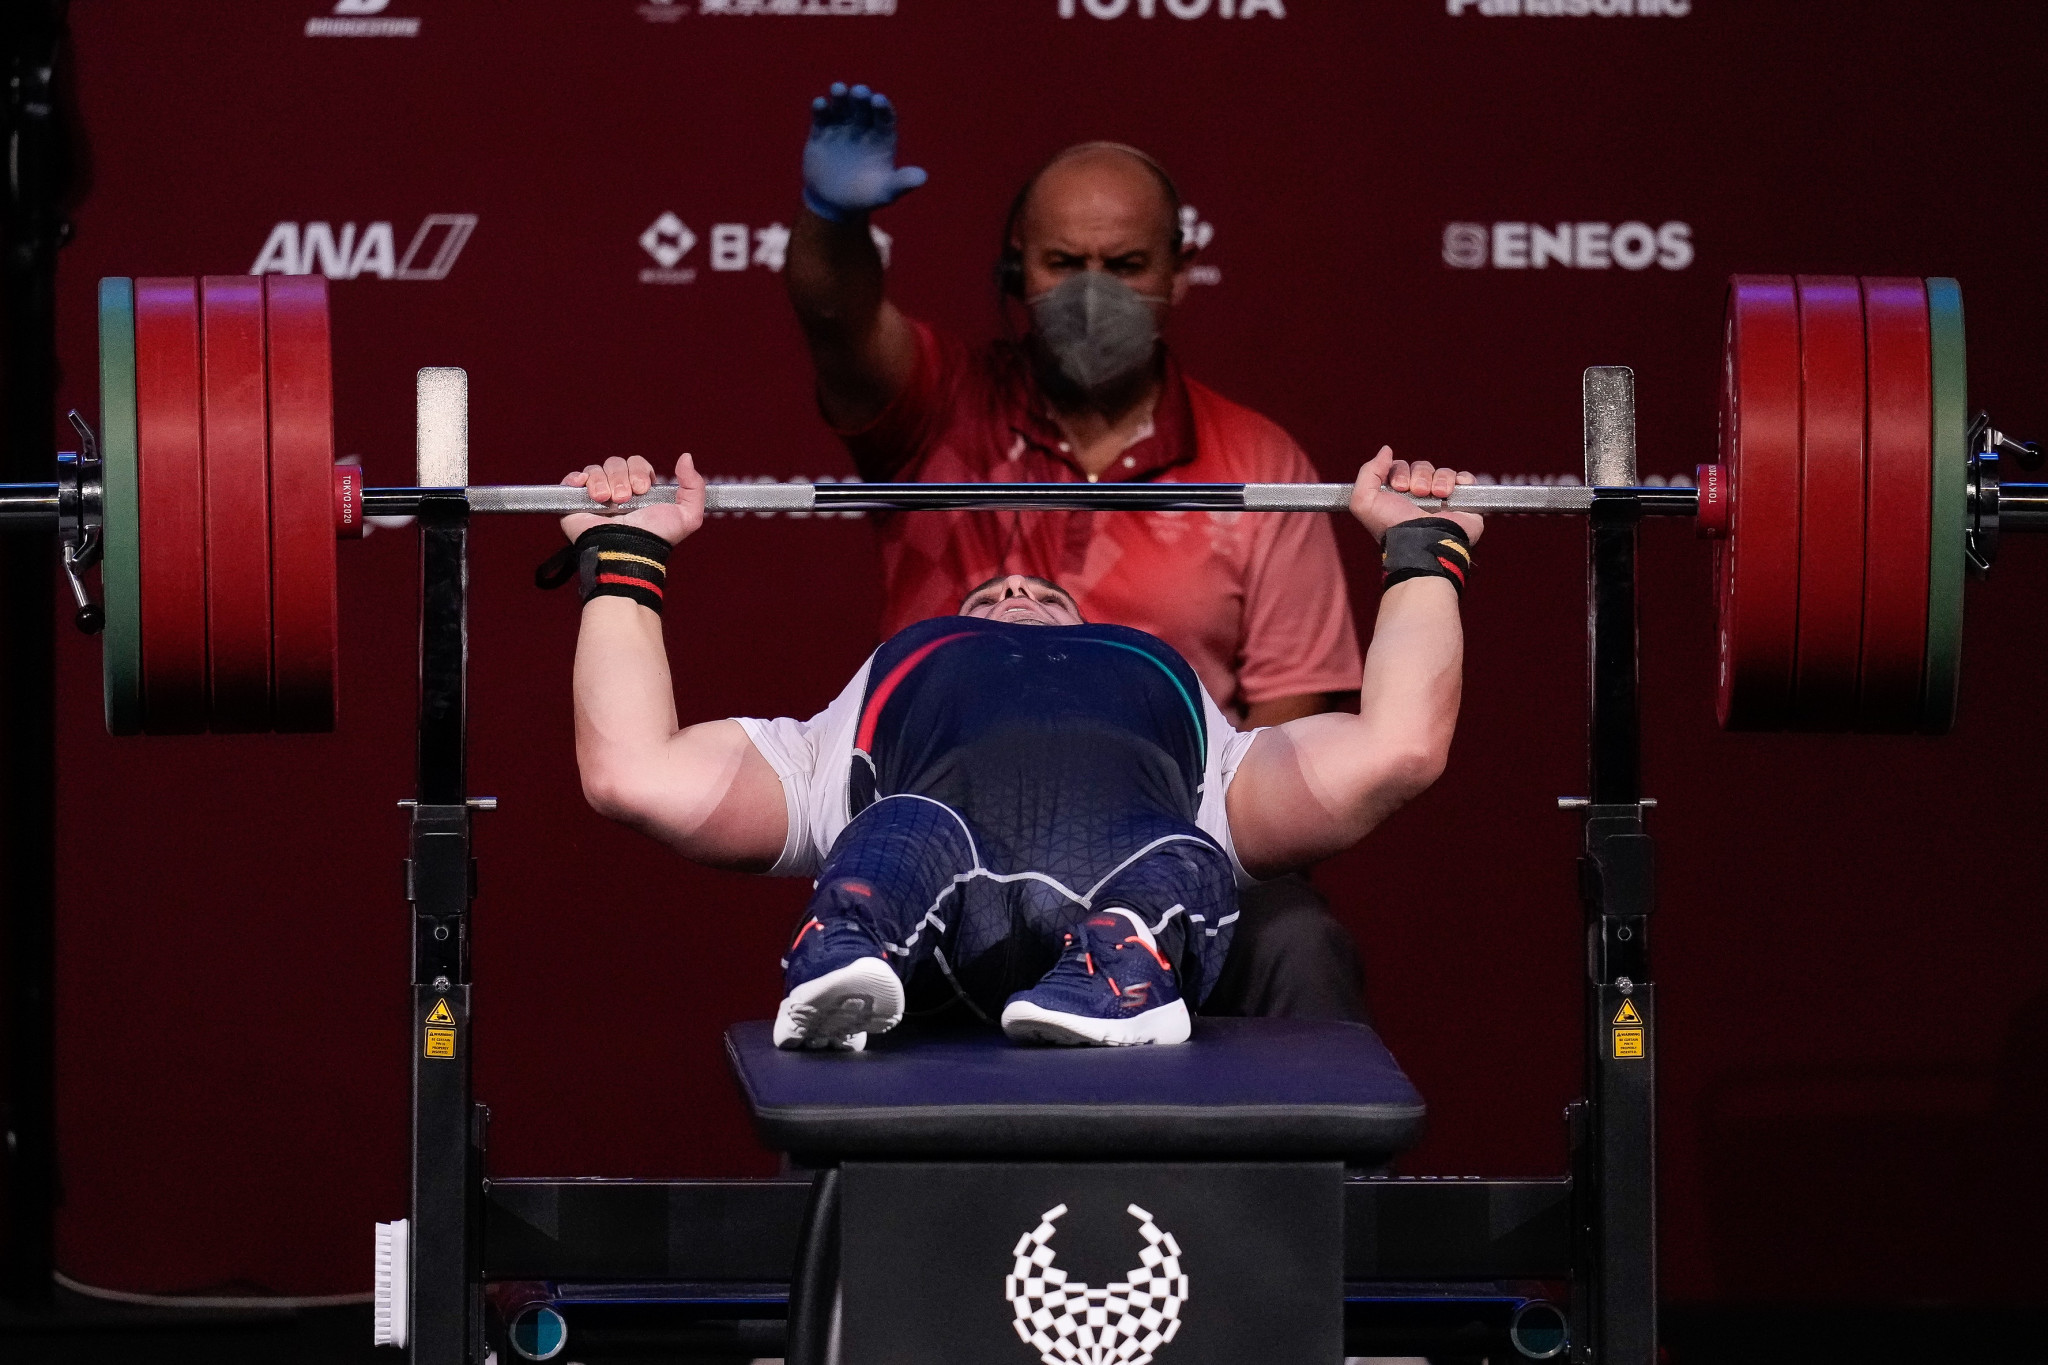 The new Para powerlifting rules came into force on March 7 following a three-year consultation process ©Getty Images